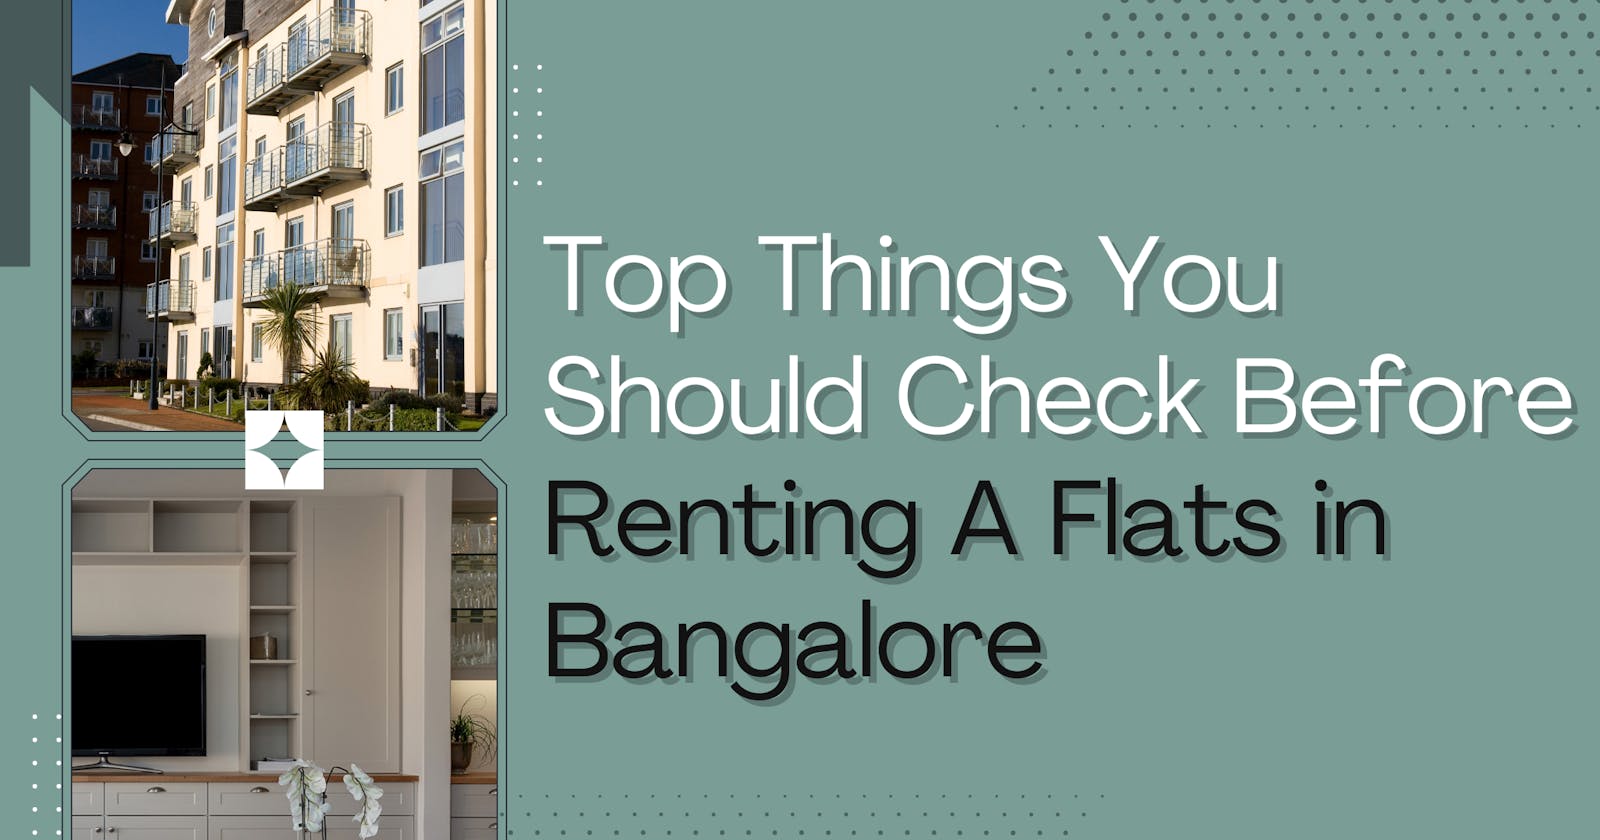 Top things you should check before renting a flat in Bangalore